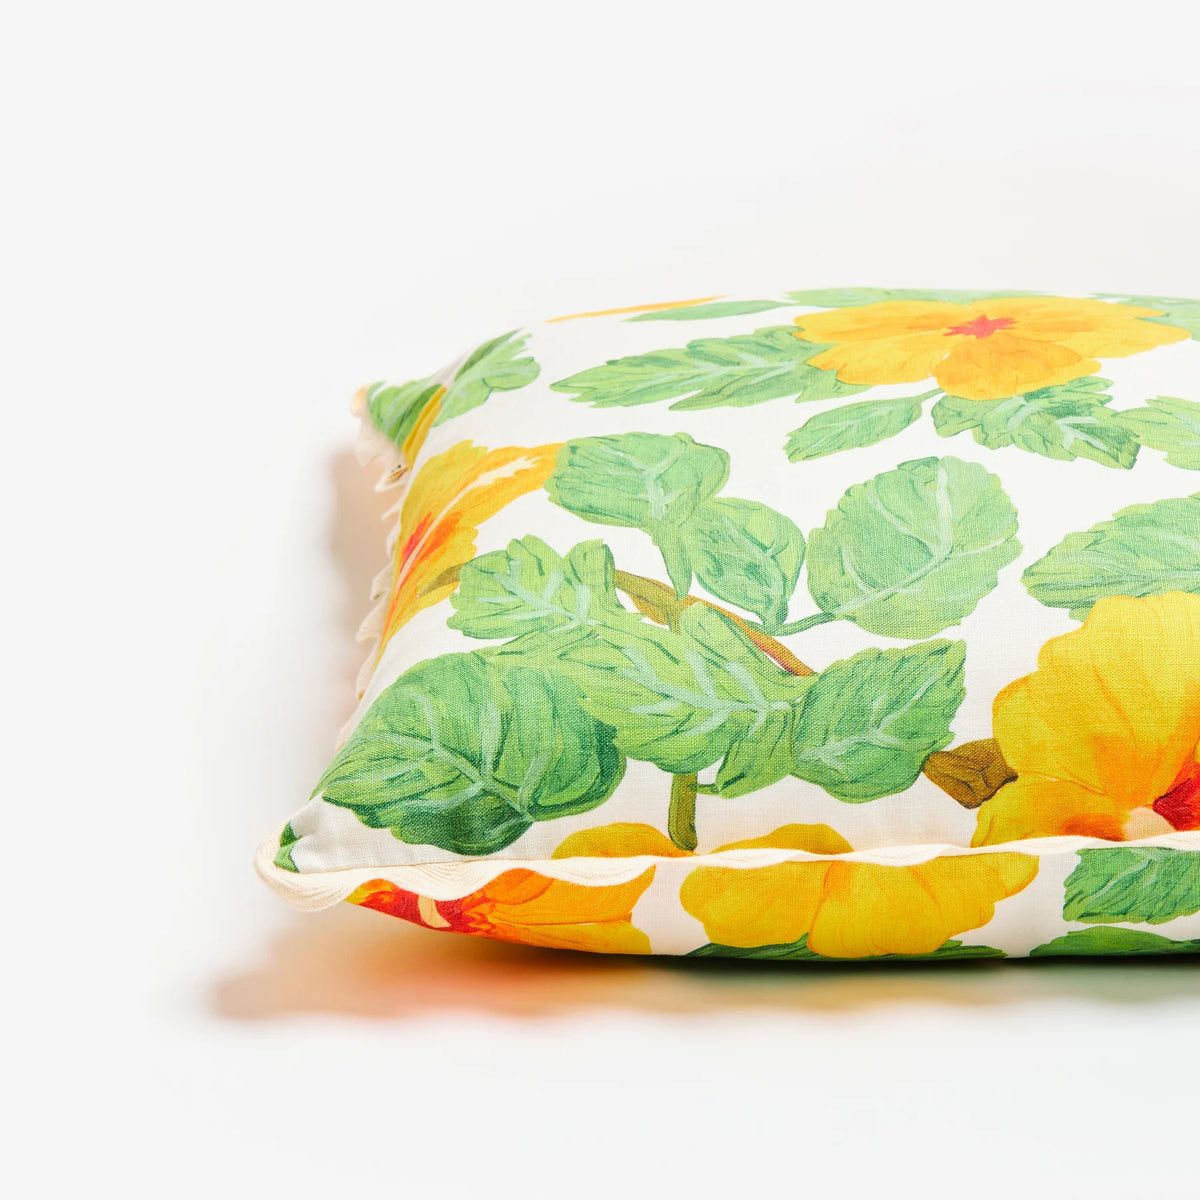 Bonnie and Neil Hibiscus Yellow Cushion - FC367